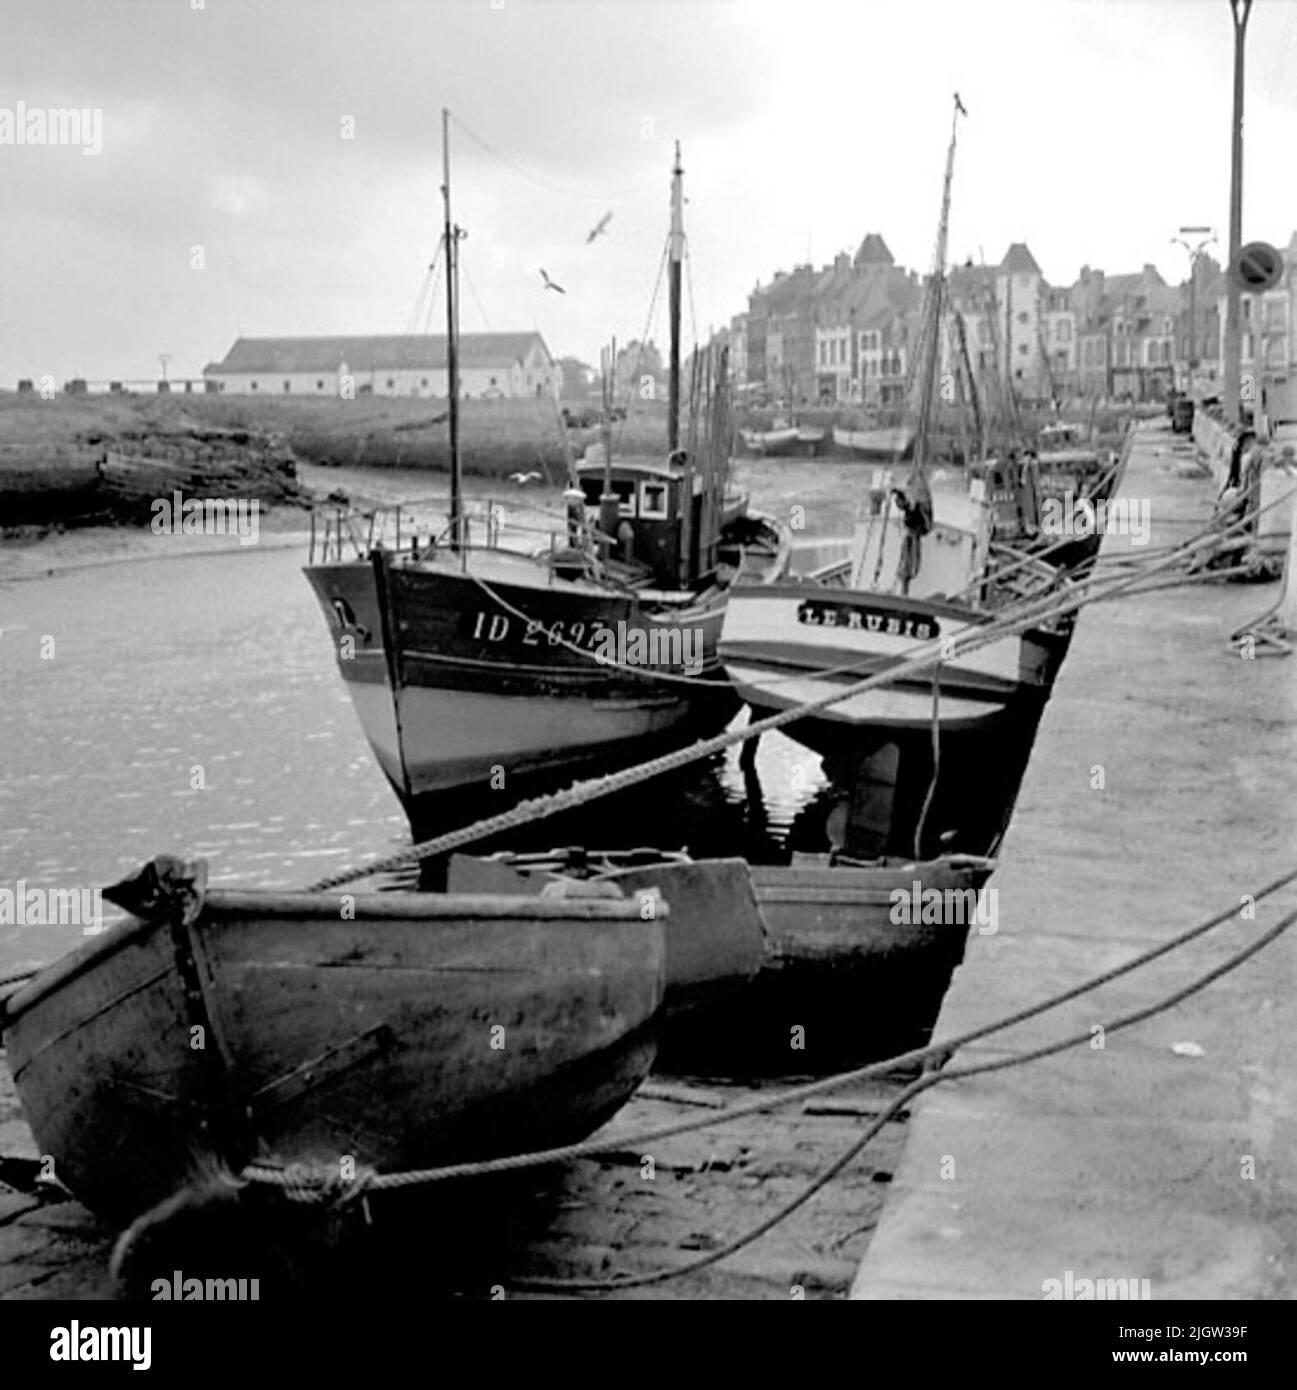 10. France. Photo journal is available at B.M.A. + Photo albums. Acquisition: Books and archive materials. Photos taken 1959-10-17.12 Pictures in series. According to notes: France. Atlantic coast, Le Croisic, 17/10 -59. Boats of different types. Most common and oldest? Seems the boats with aft mirror to be, but boats with hedges or cruise only also occur. The latter appear to have first gained entry among the trawls, while the smaller boats are still clearly dominated by the stern type. A number of boats are in a port. In the background is a society. Stock Photo